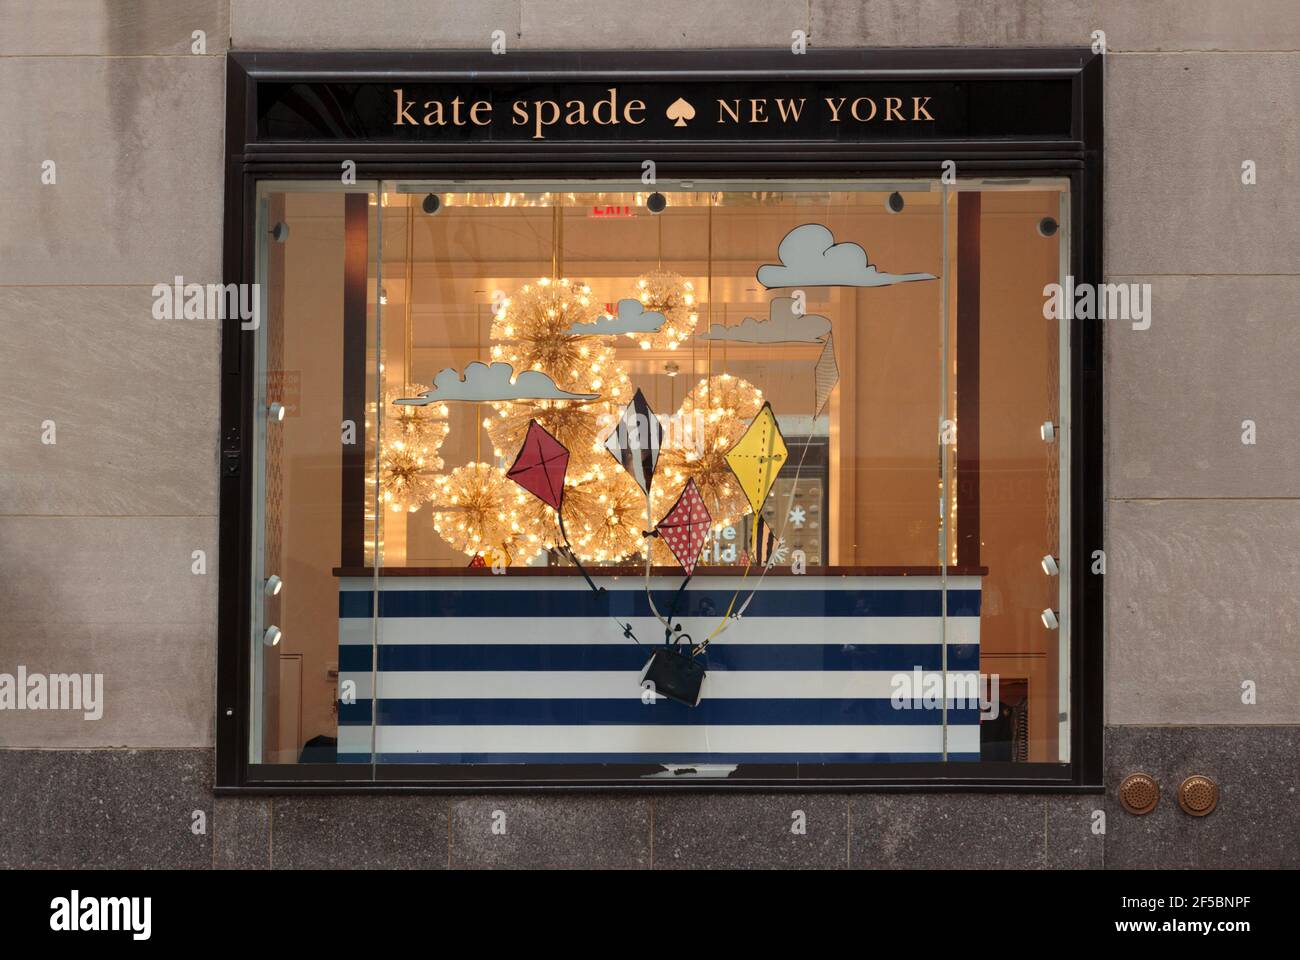 display window of the Kate Spade New York store in Rockefeller Center in  Manhattan, with a kite decoration and decorative lighting Stock Photo -  Alamy